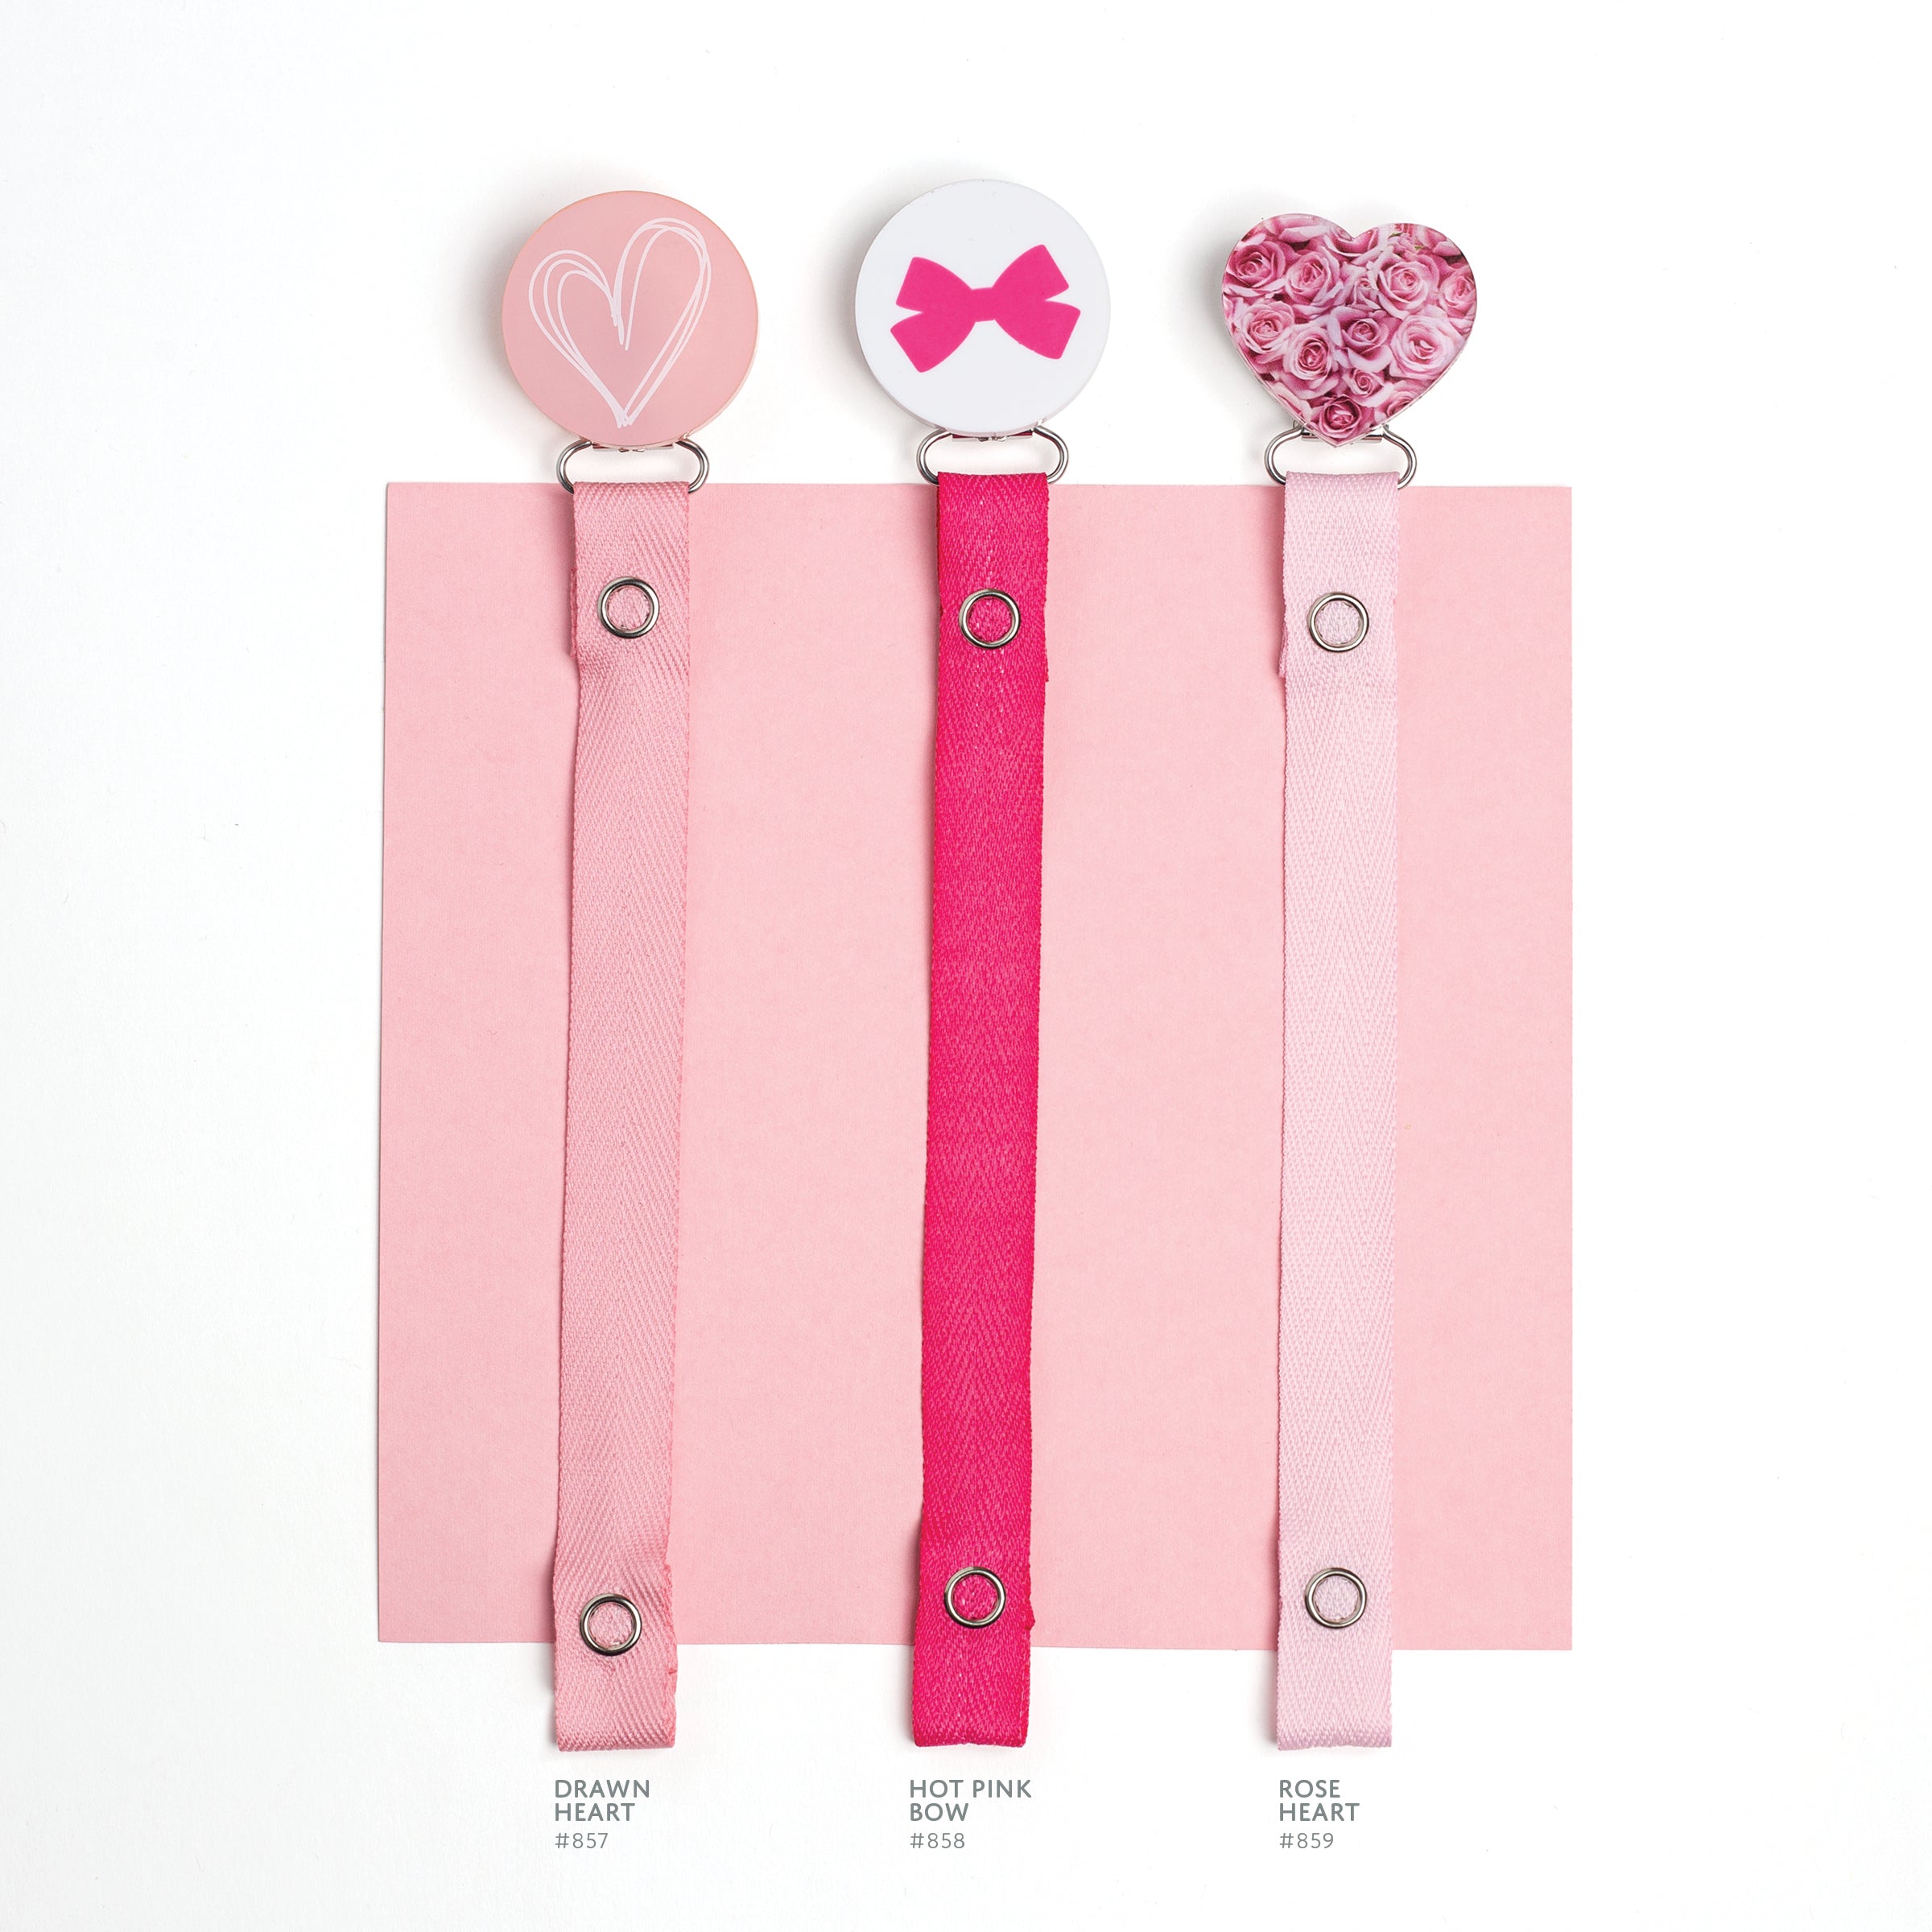 Classy Paci Hot pink bow on white clip with Bibs Pacifier GIFT SET